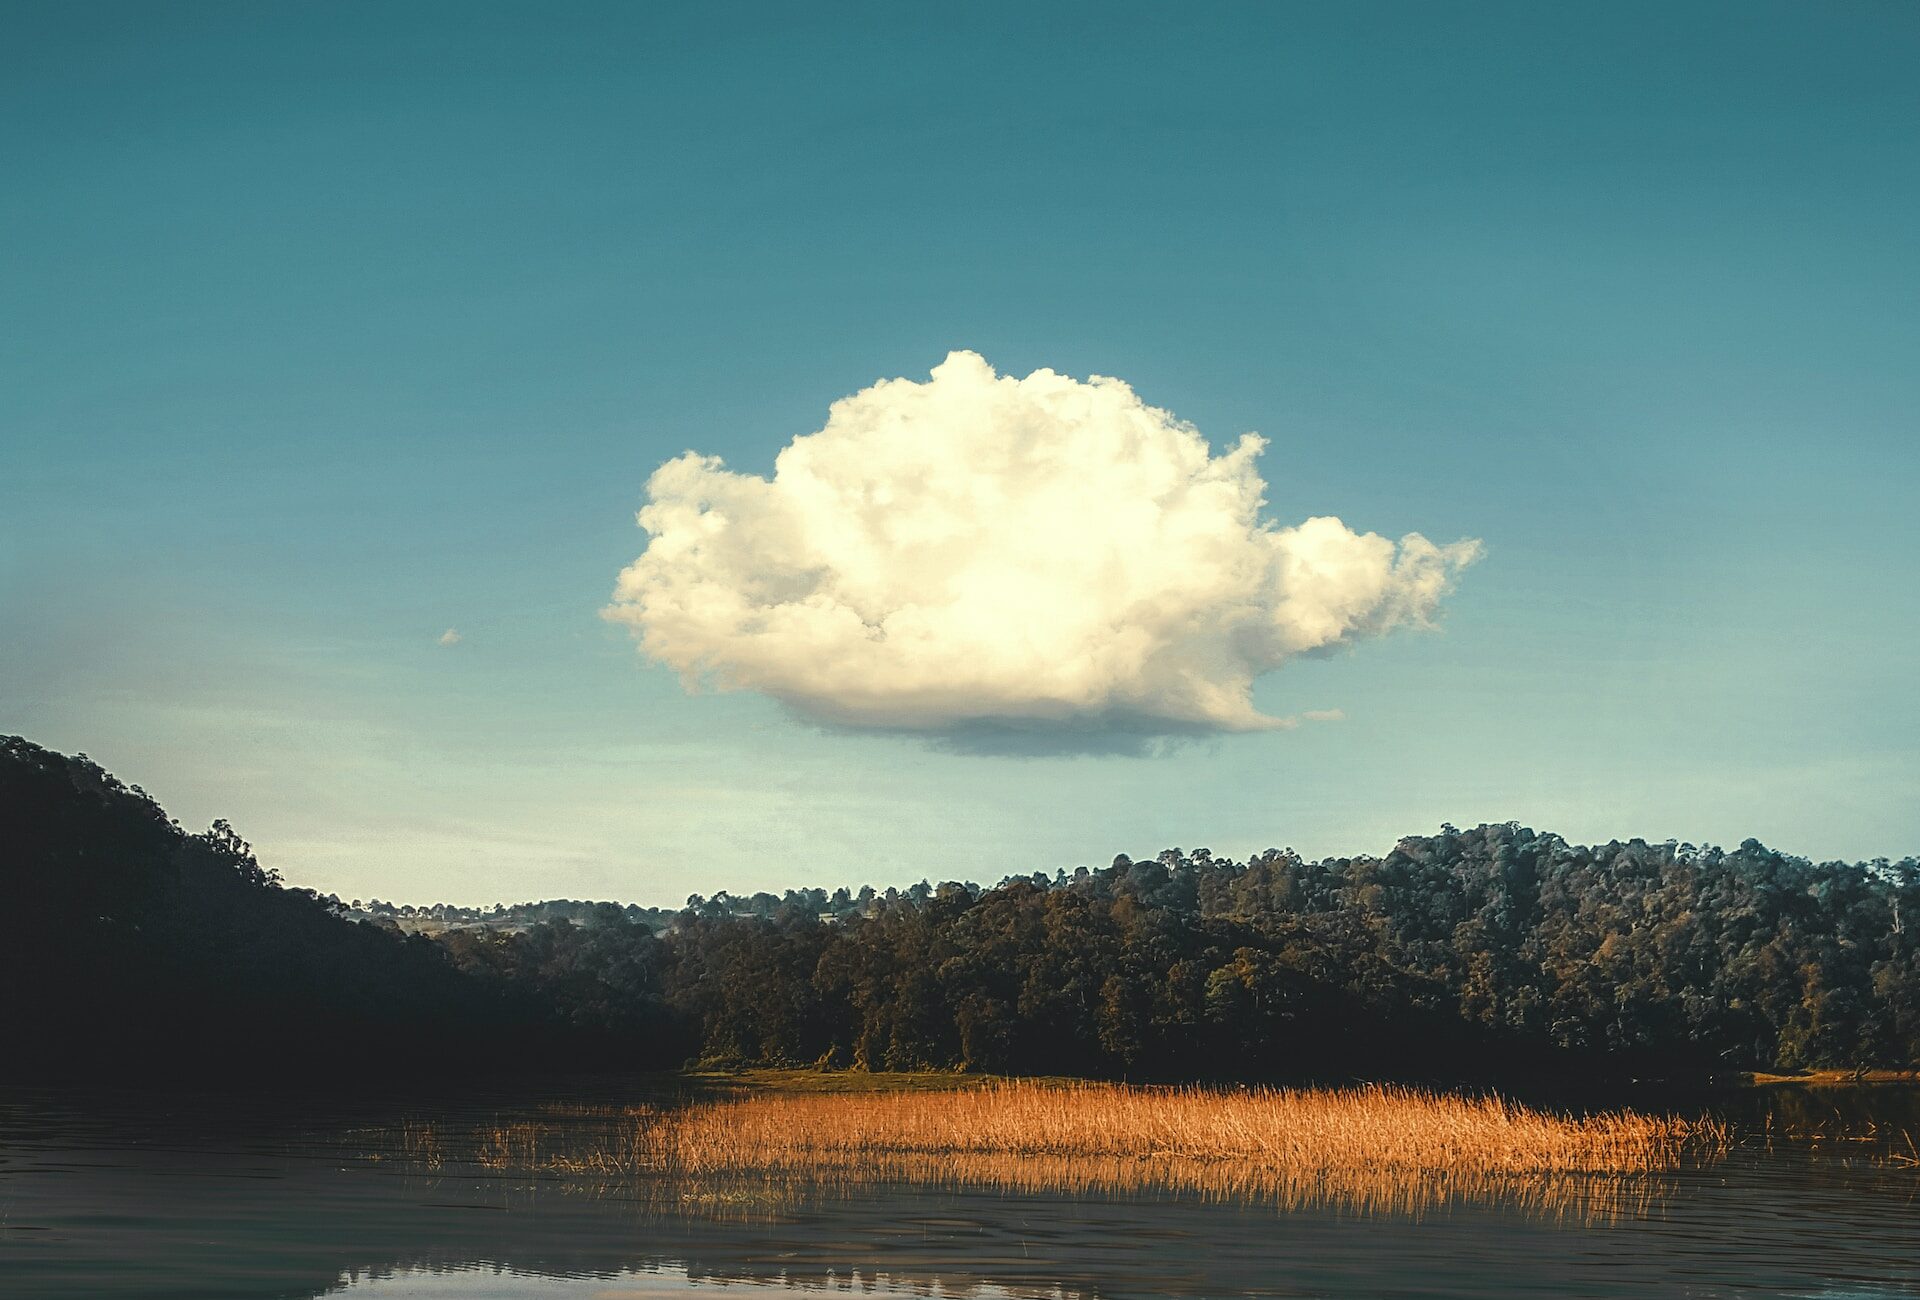 image of cloud over lake with blue skies and trees in background | Palo Alto Networks